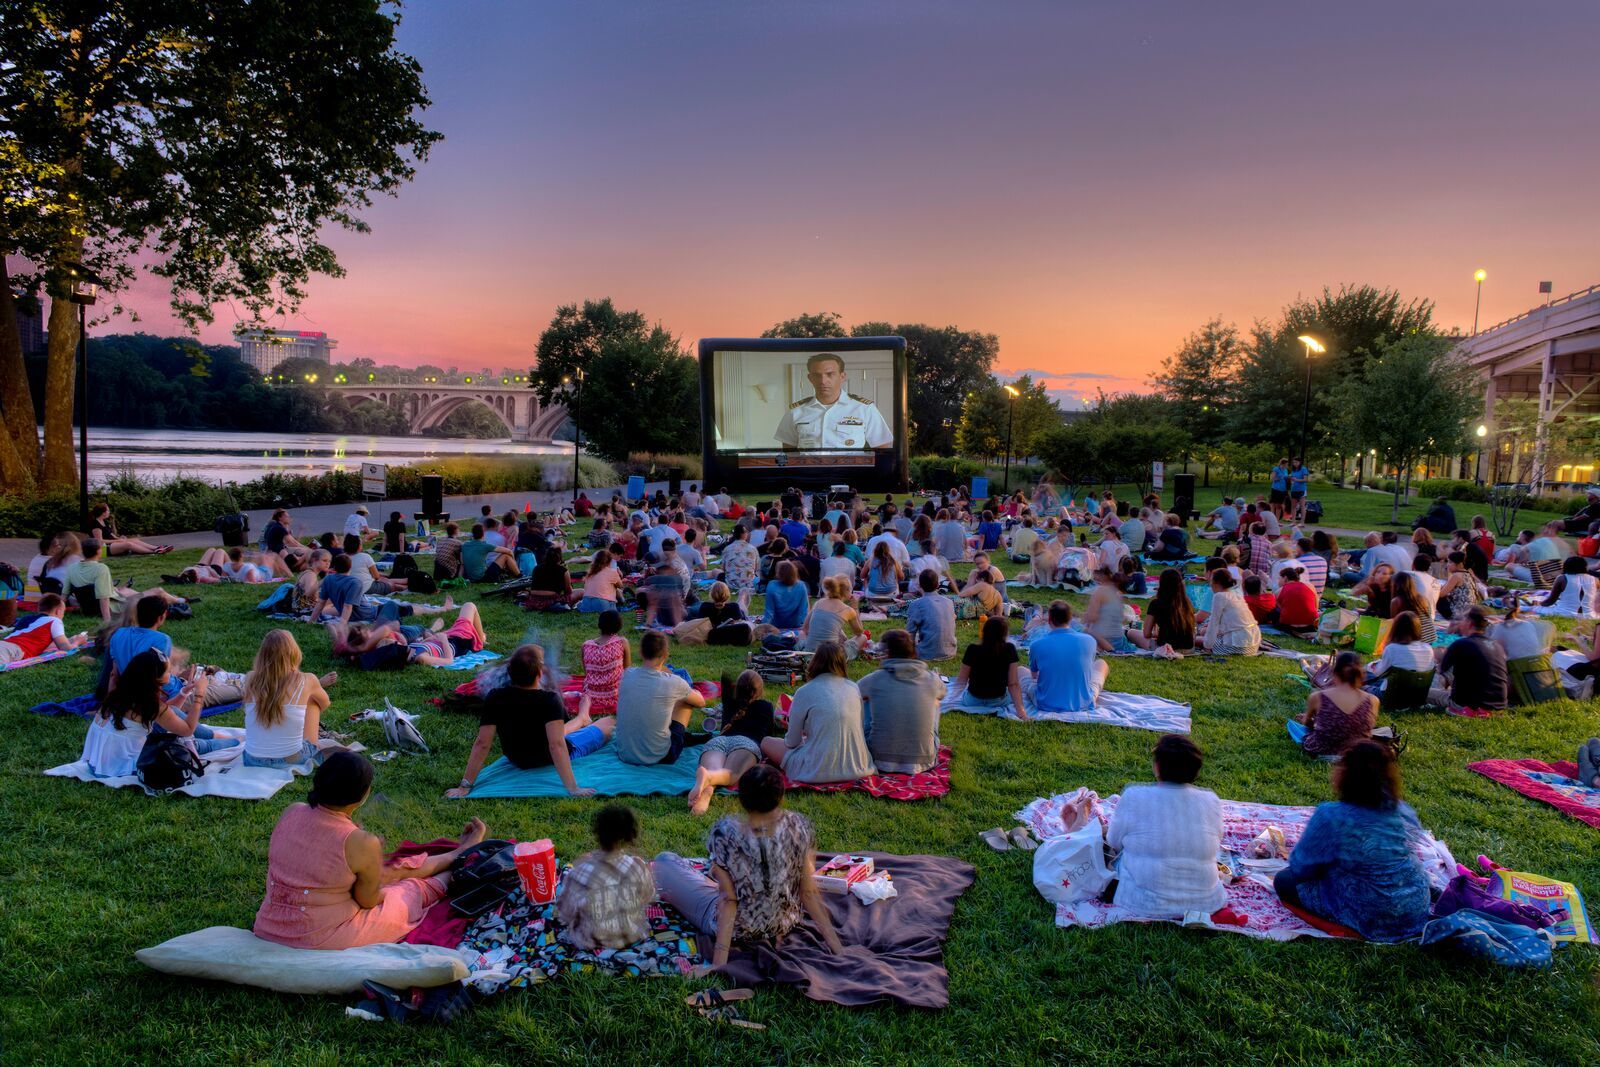 Attend an outdoor movie